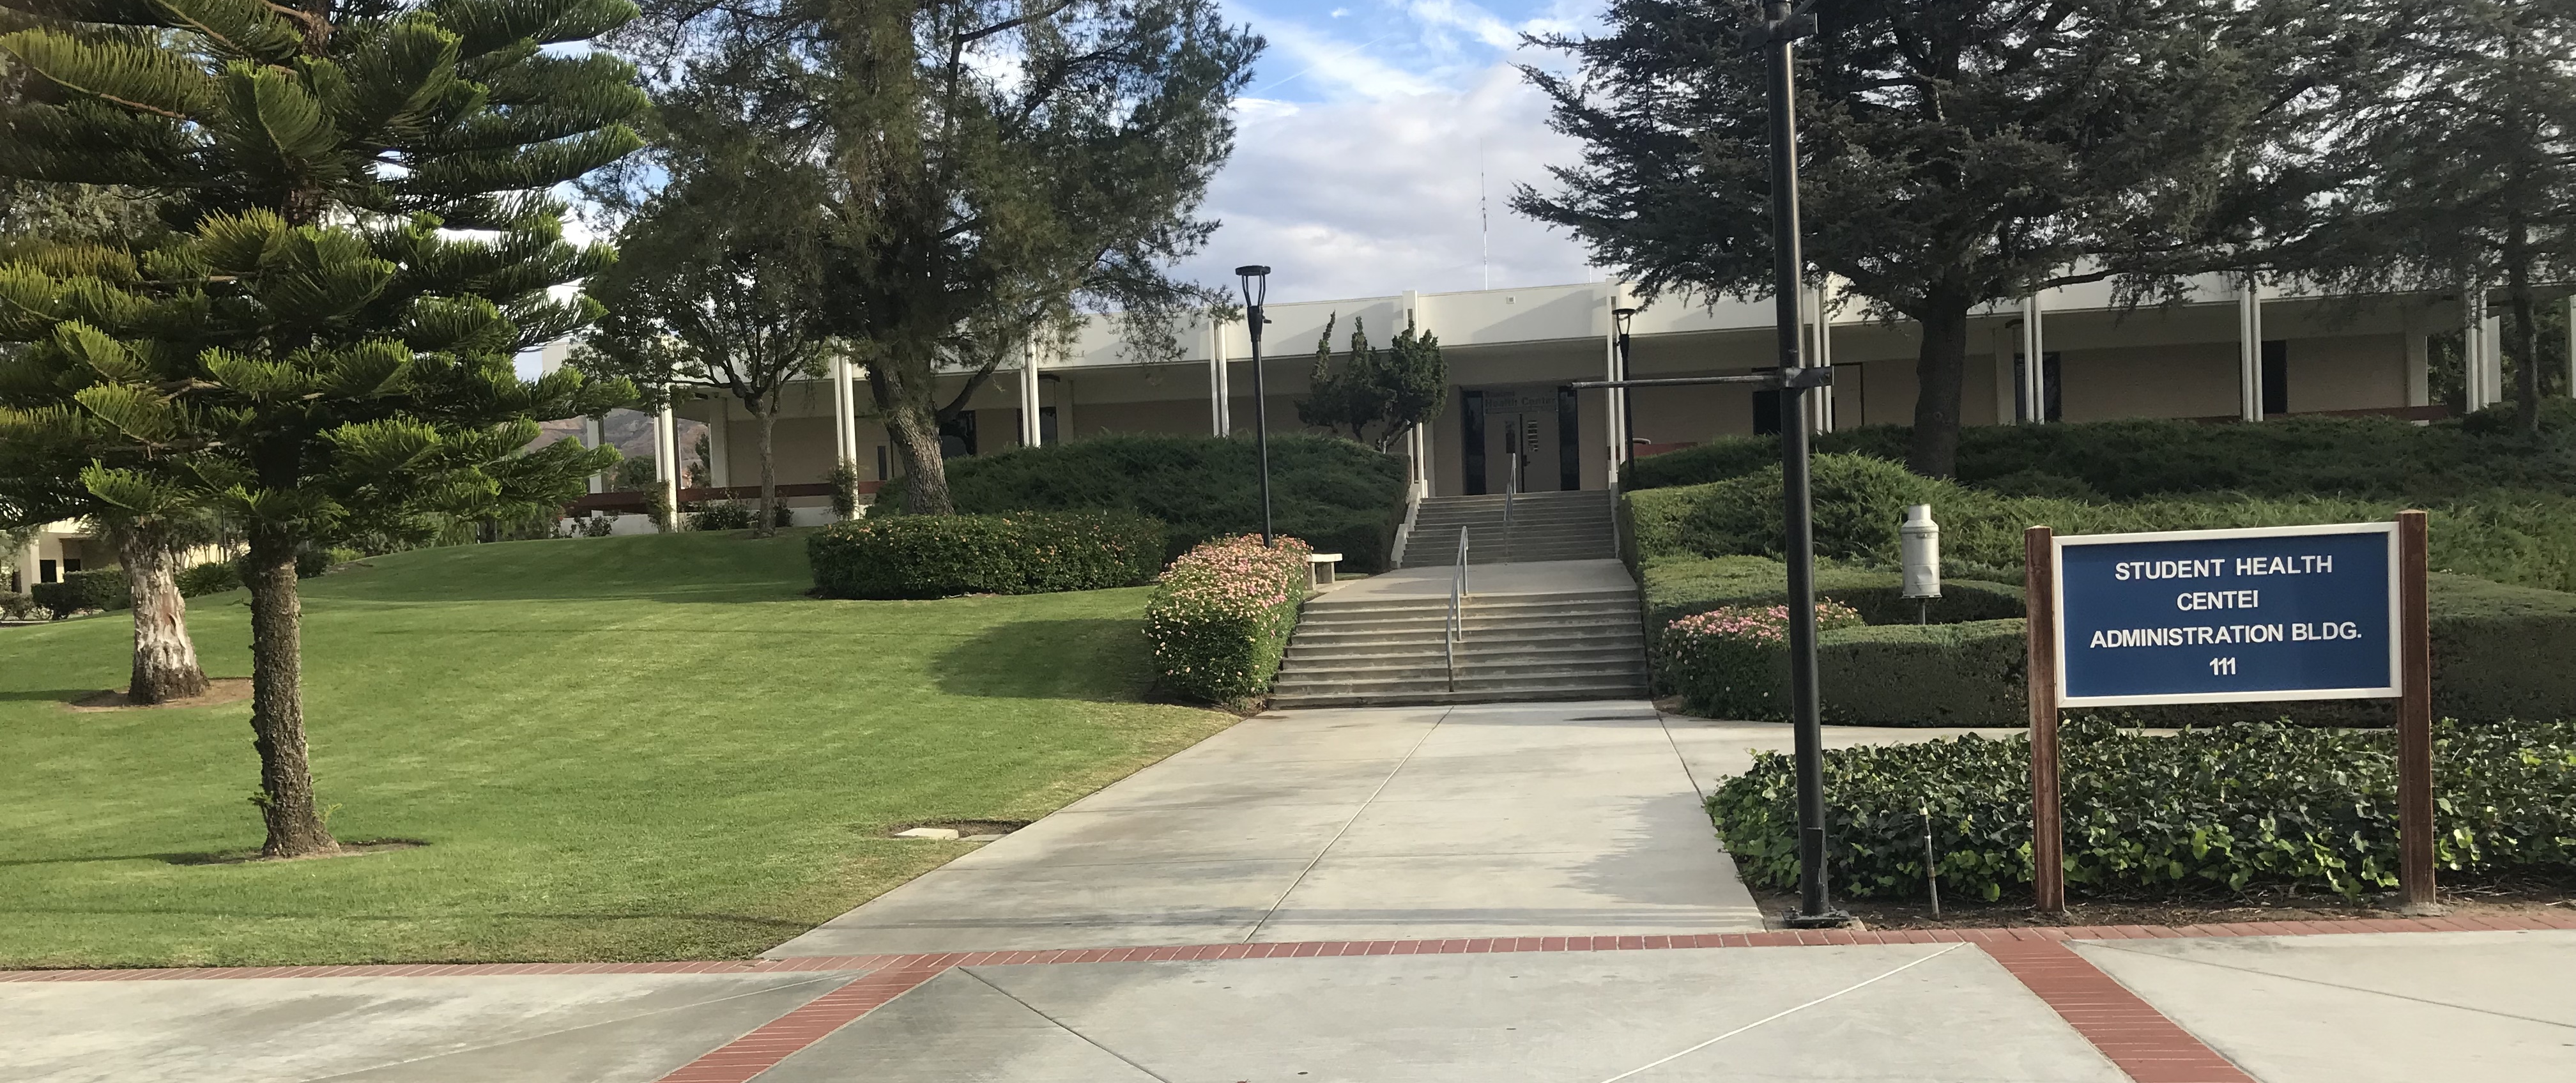 View of the Student Health Center Entrance from Raider Walk